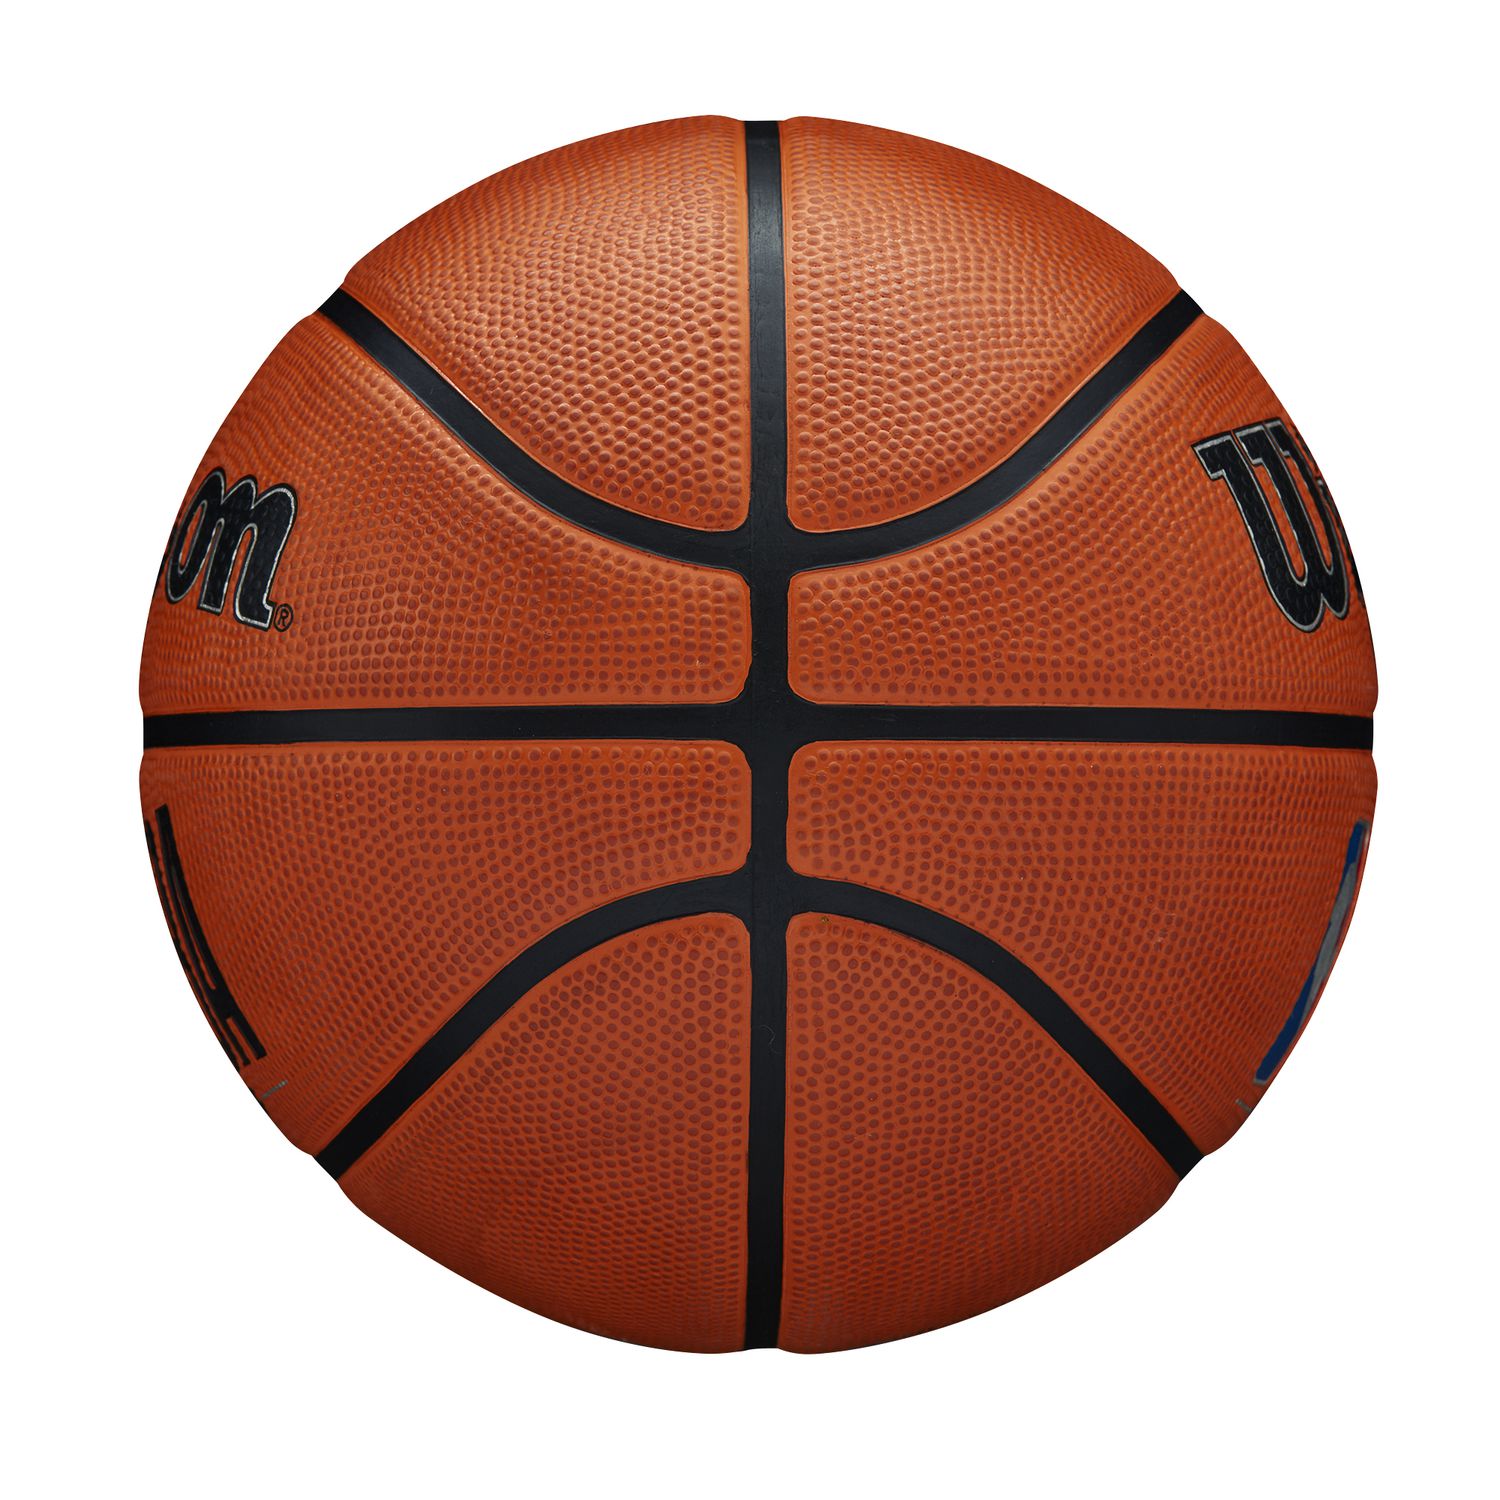 WILSON NBA DRV PRO BASKETBALL OFFICIAL SIZE, Official Size